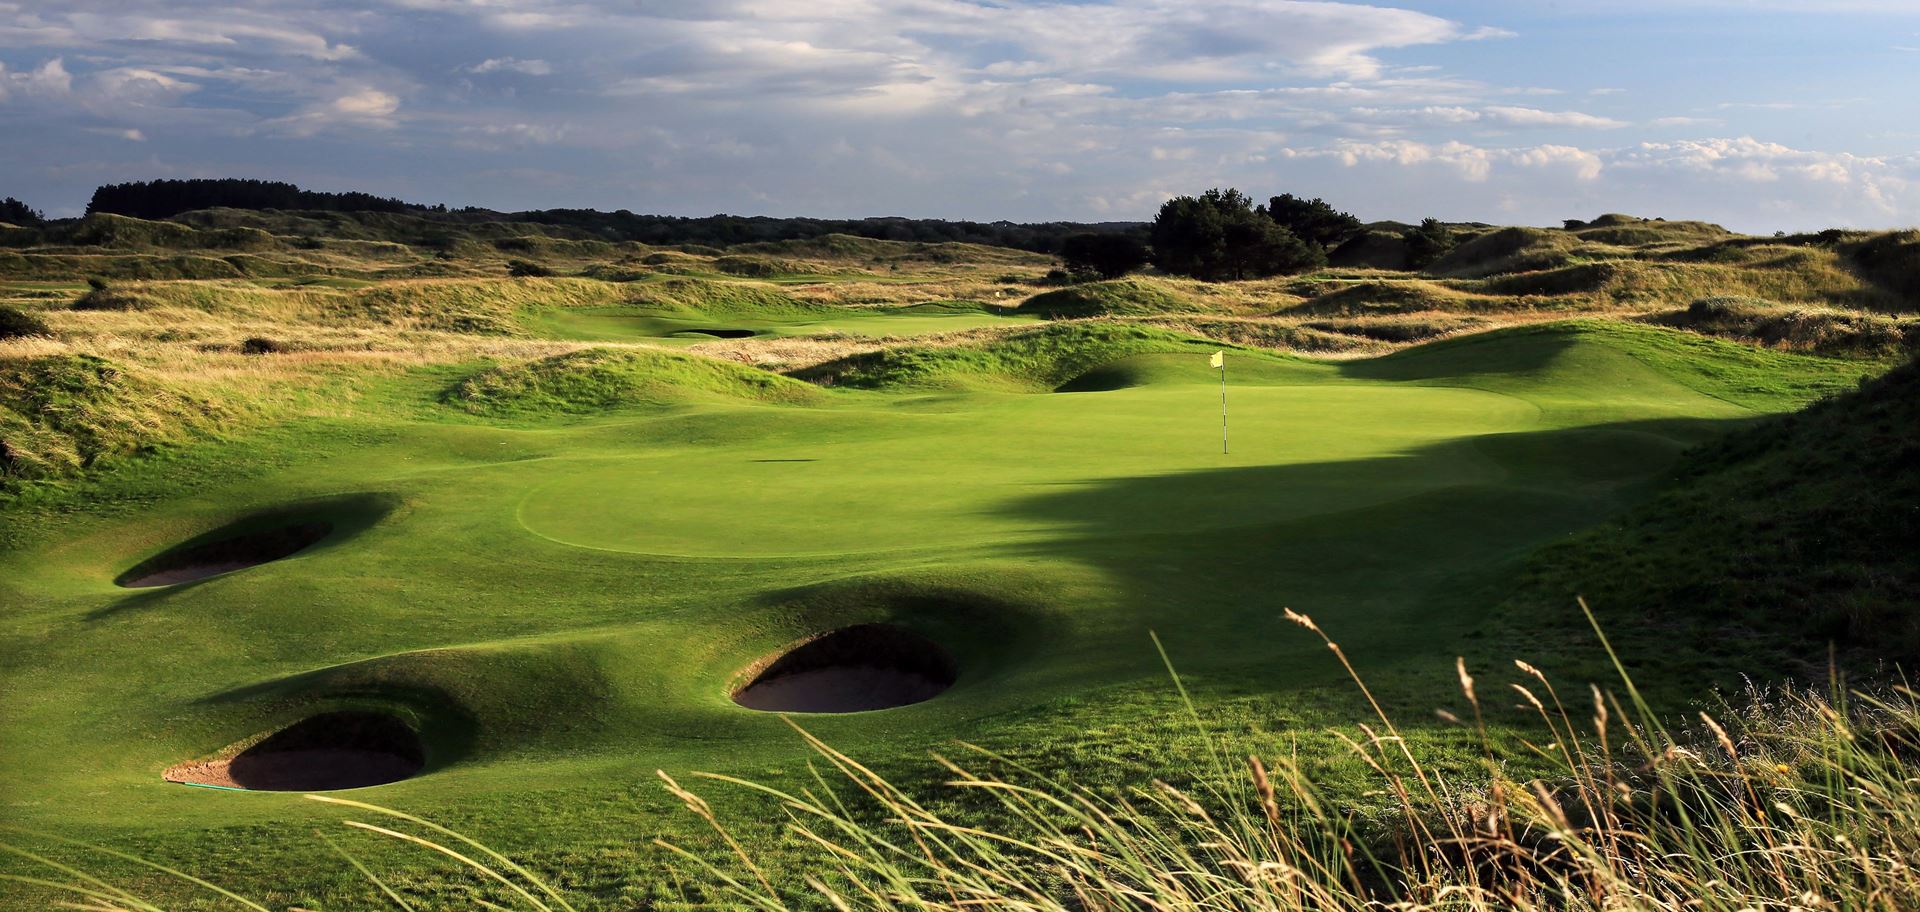 Deep pot bunkers and green runoff areas cause havoc for golfers